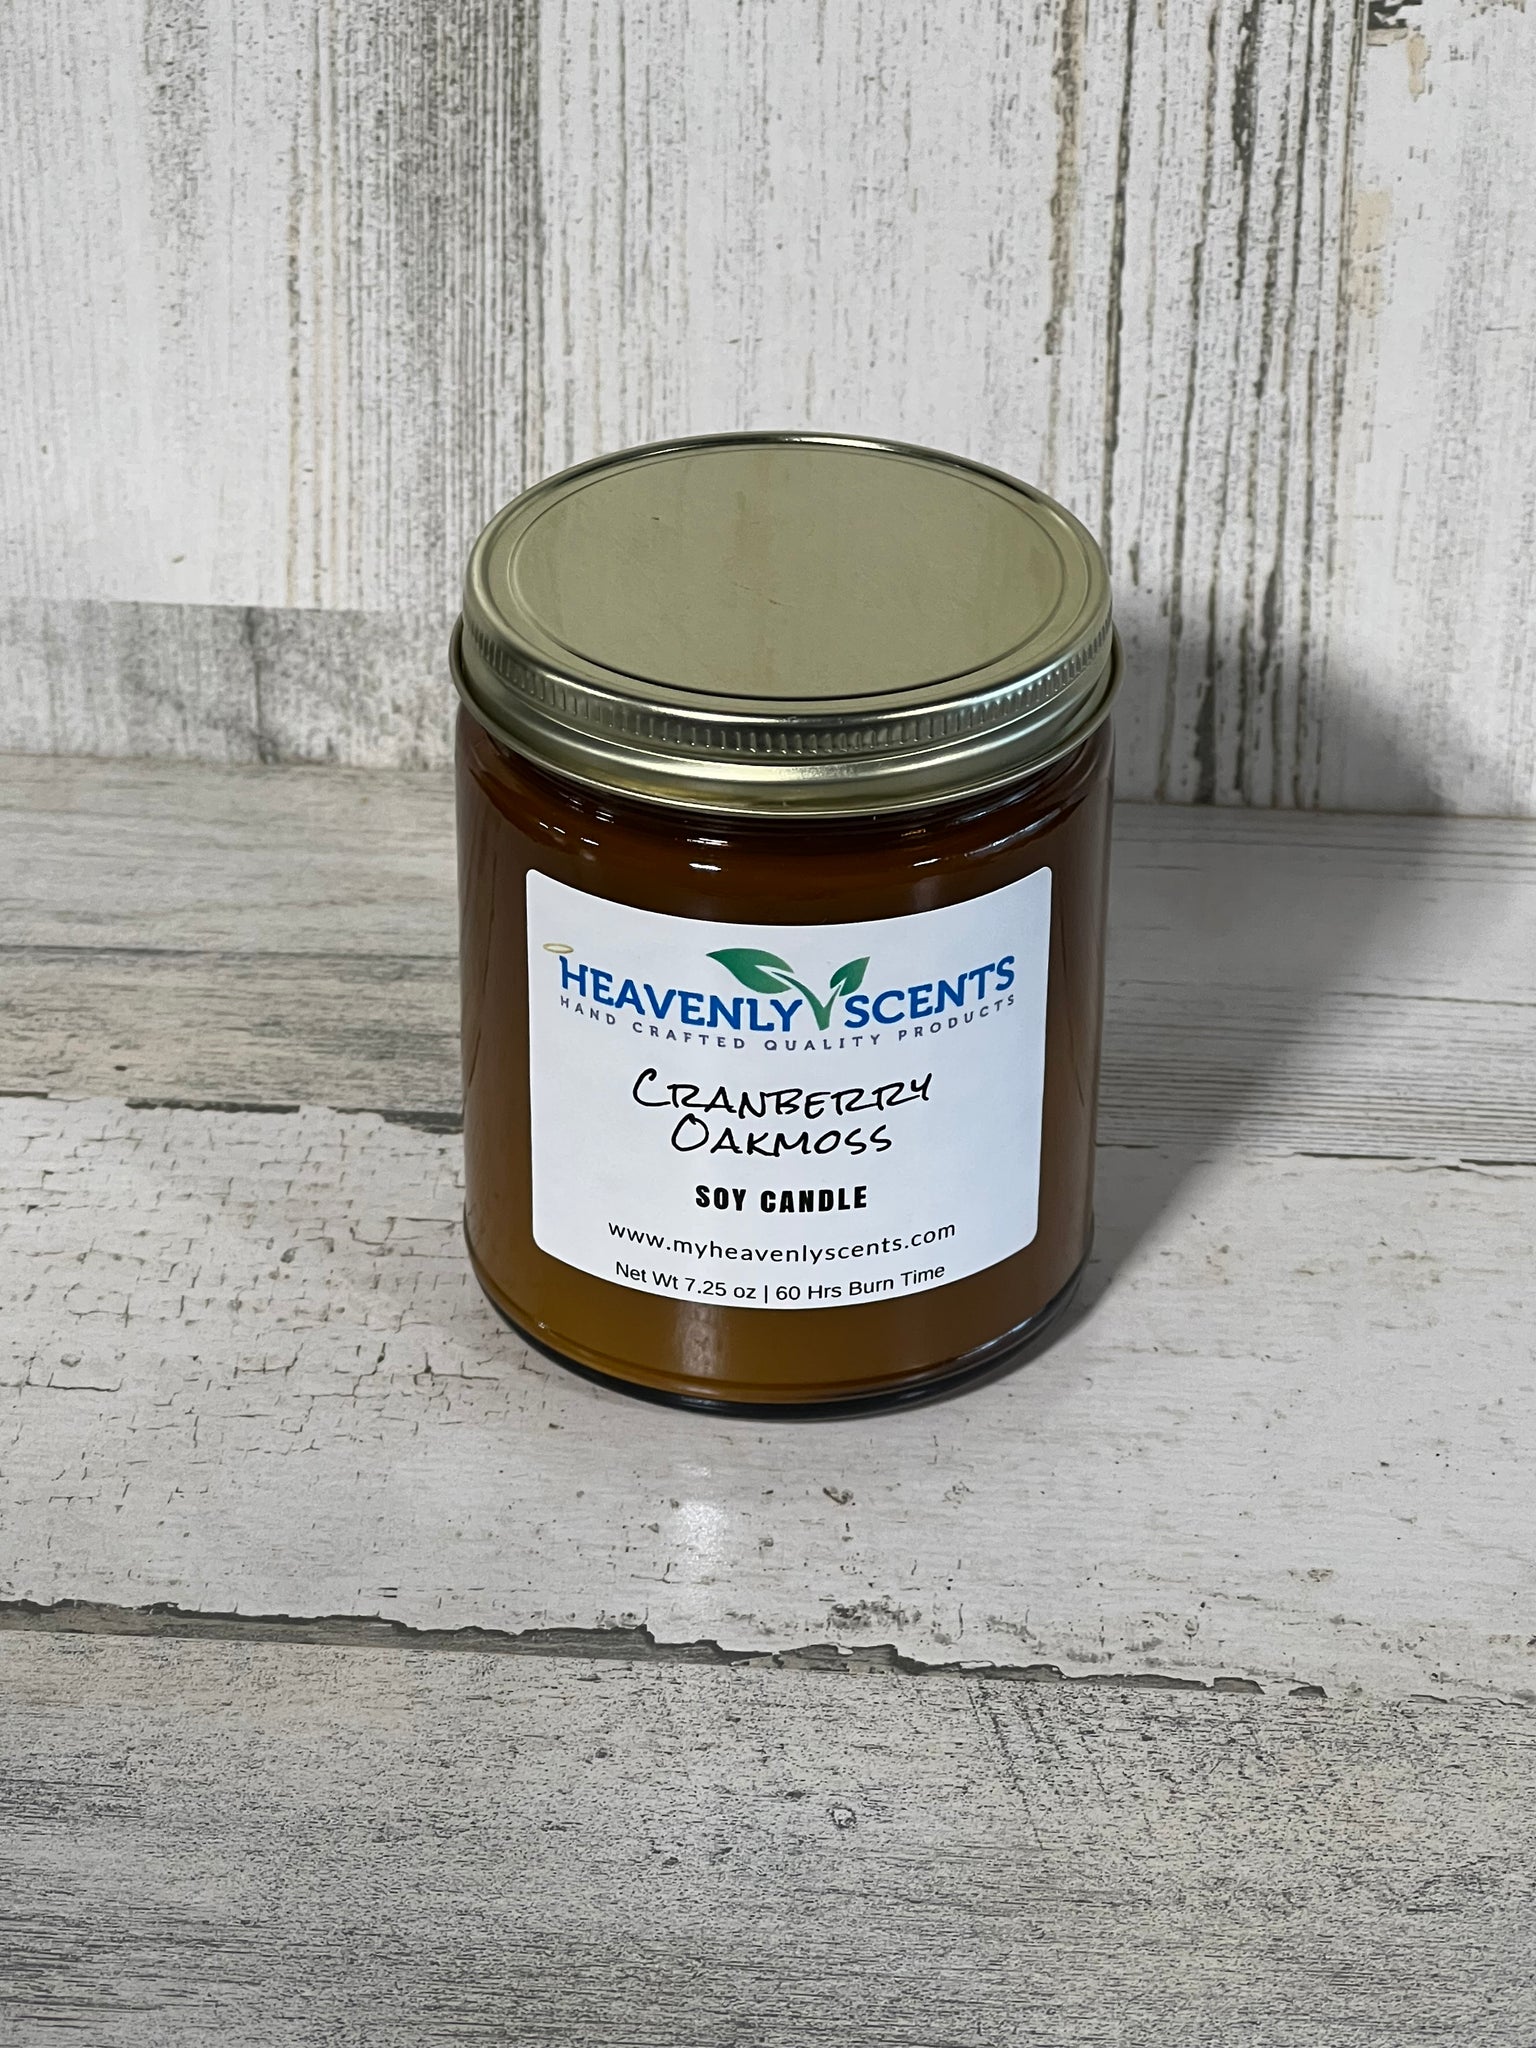 Cranberry Oakmoss Soy Wax Candle from Heavenly Scents